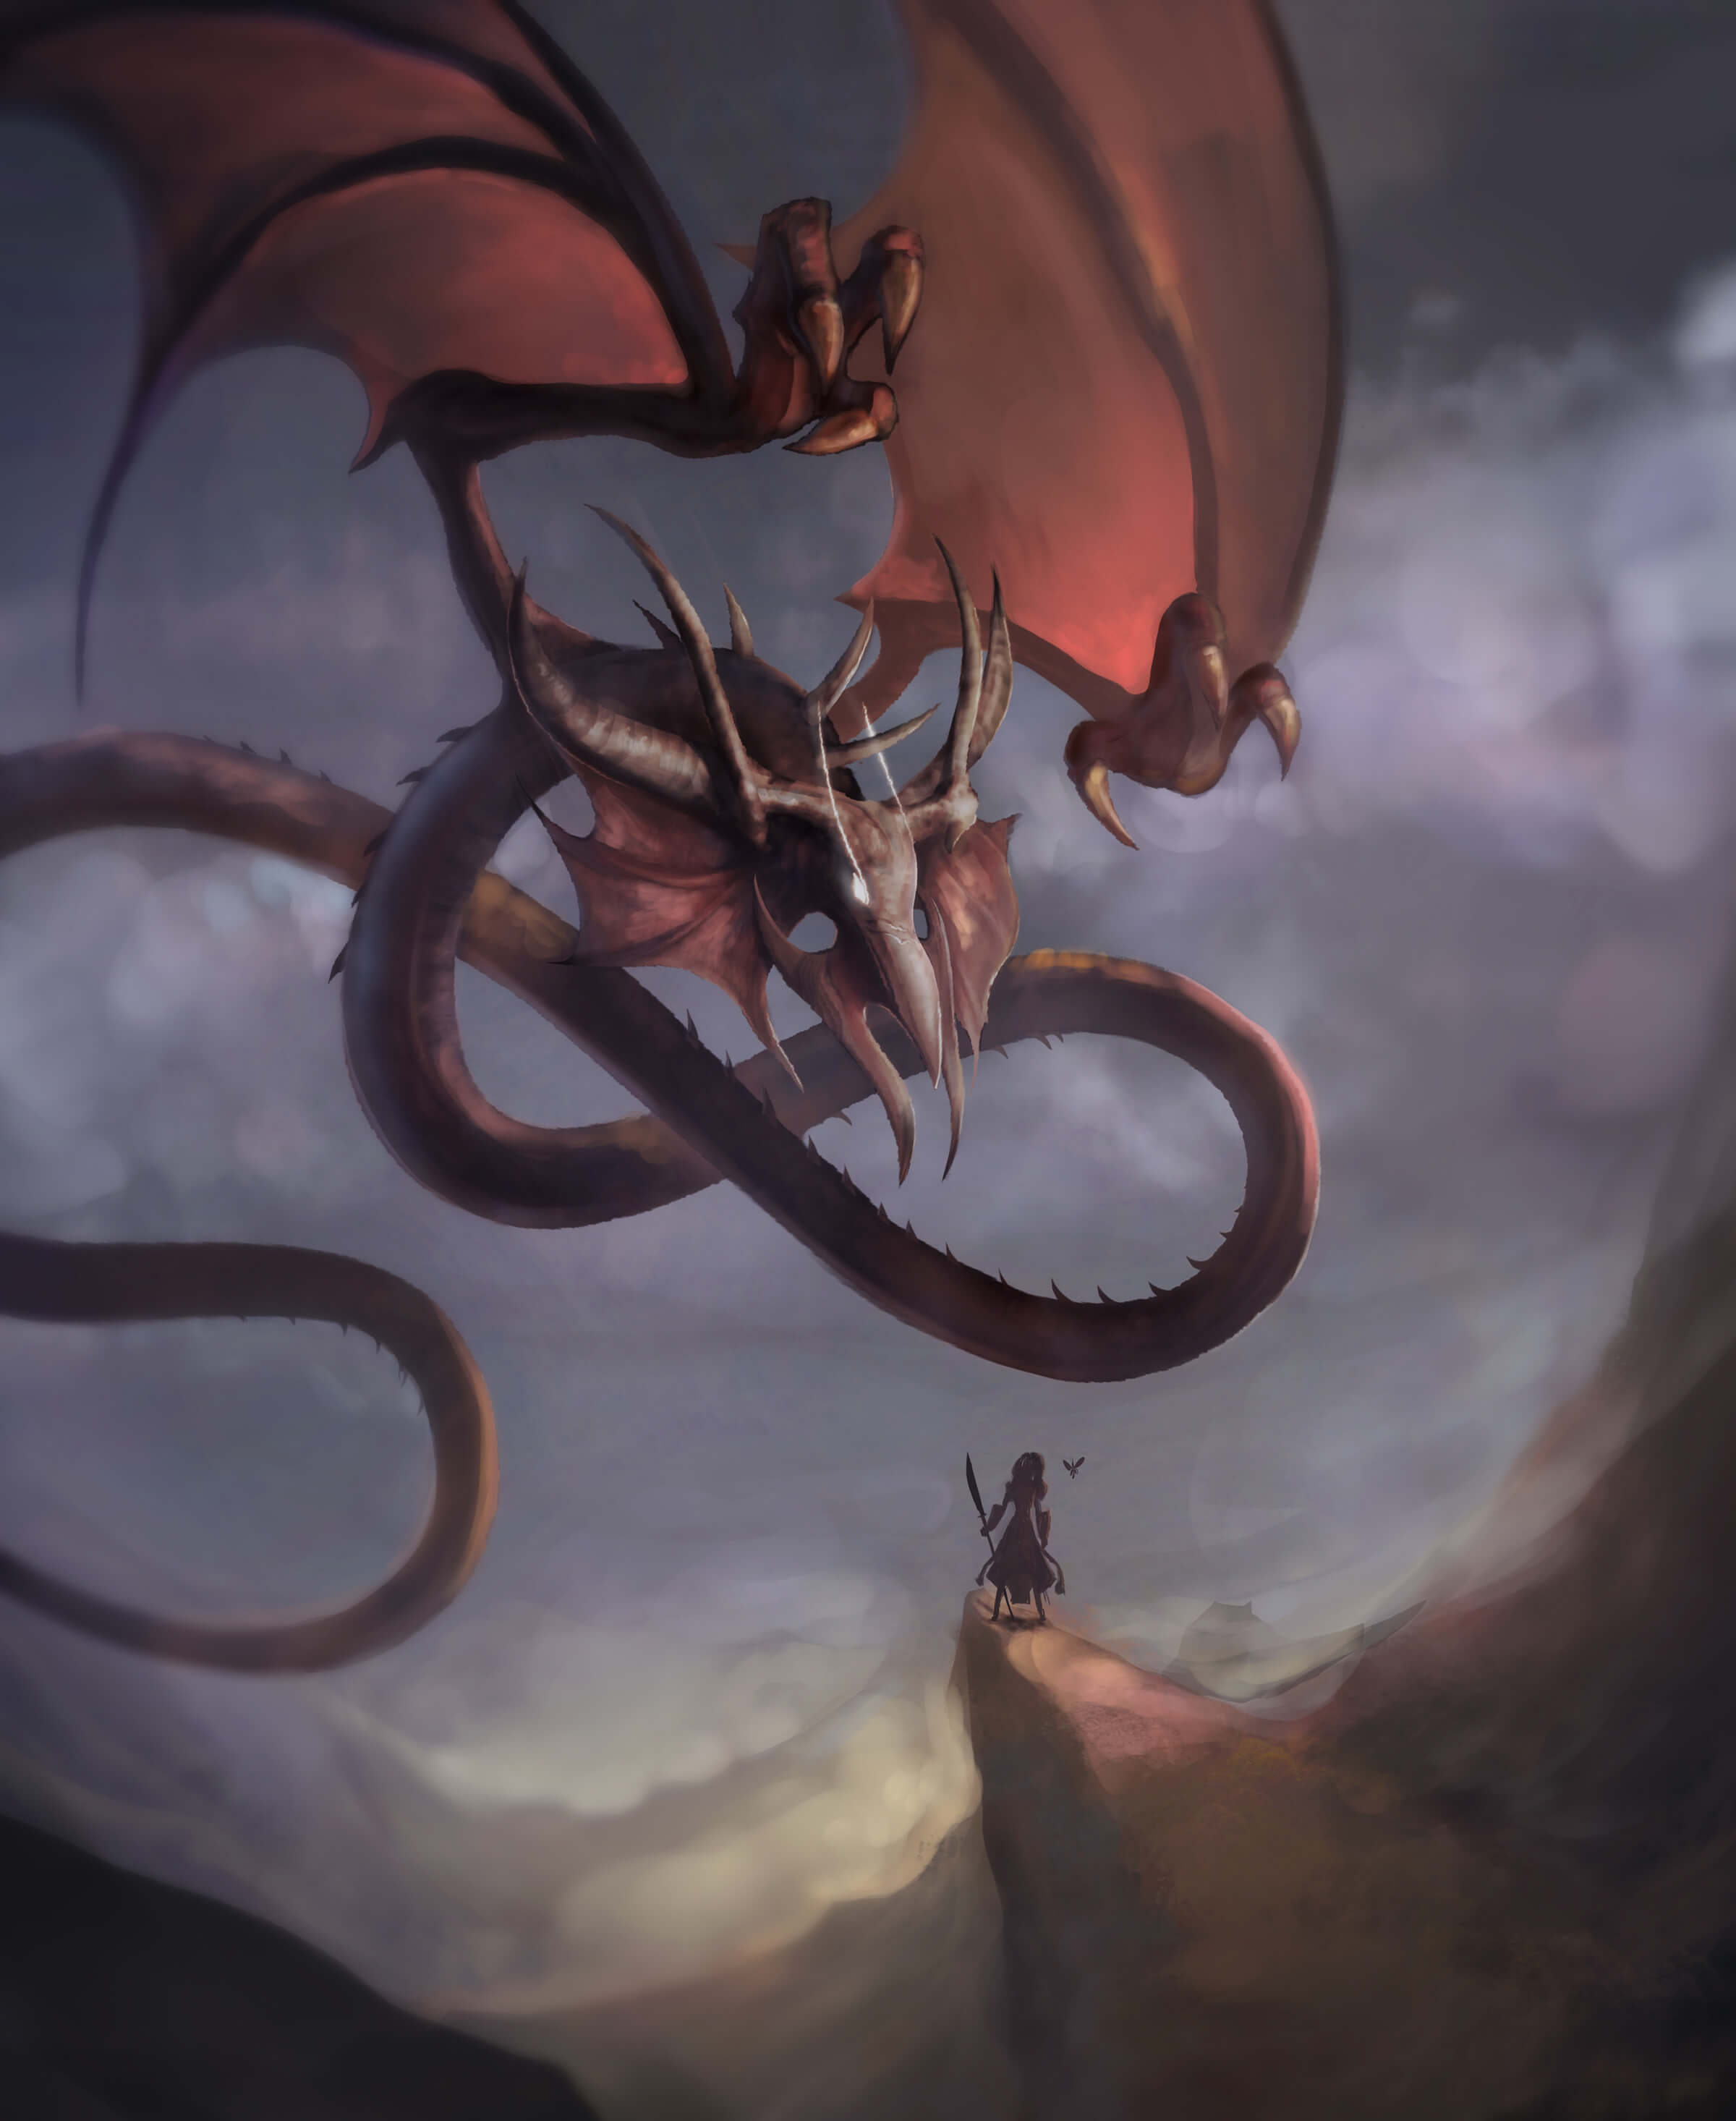 A person standing on a cliff faces a large dragon